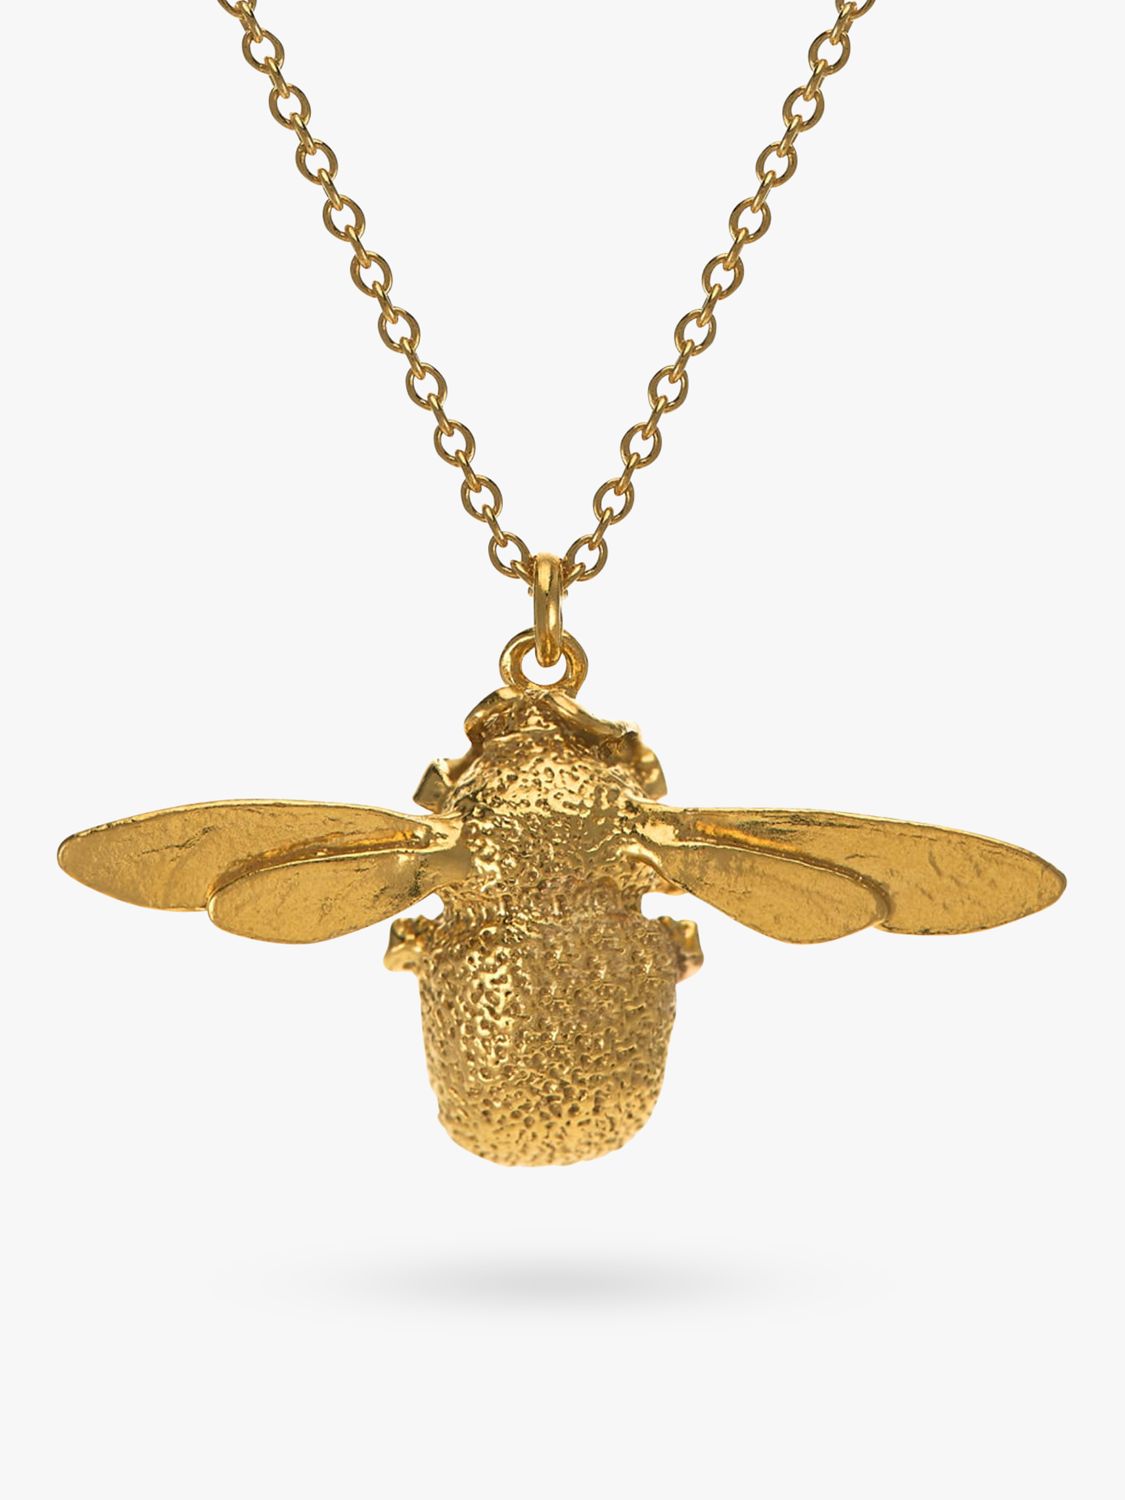 Bumble Bee Pendant Necklace, Gold